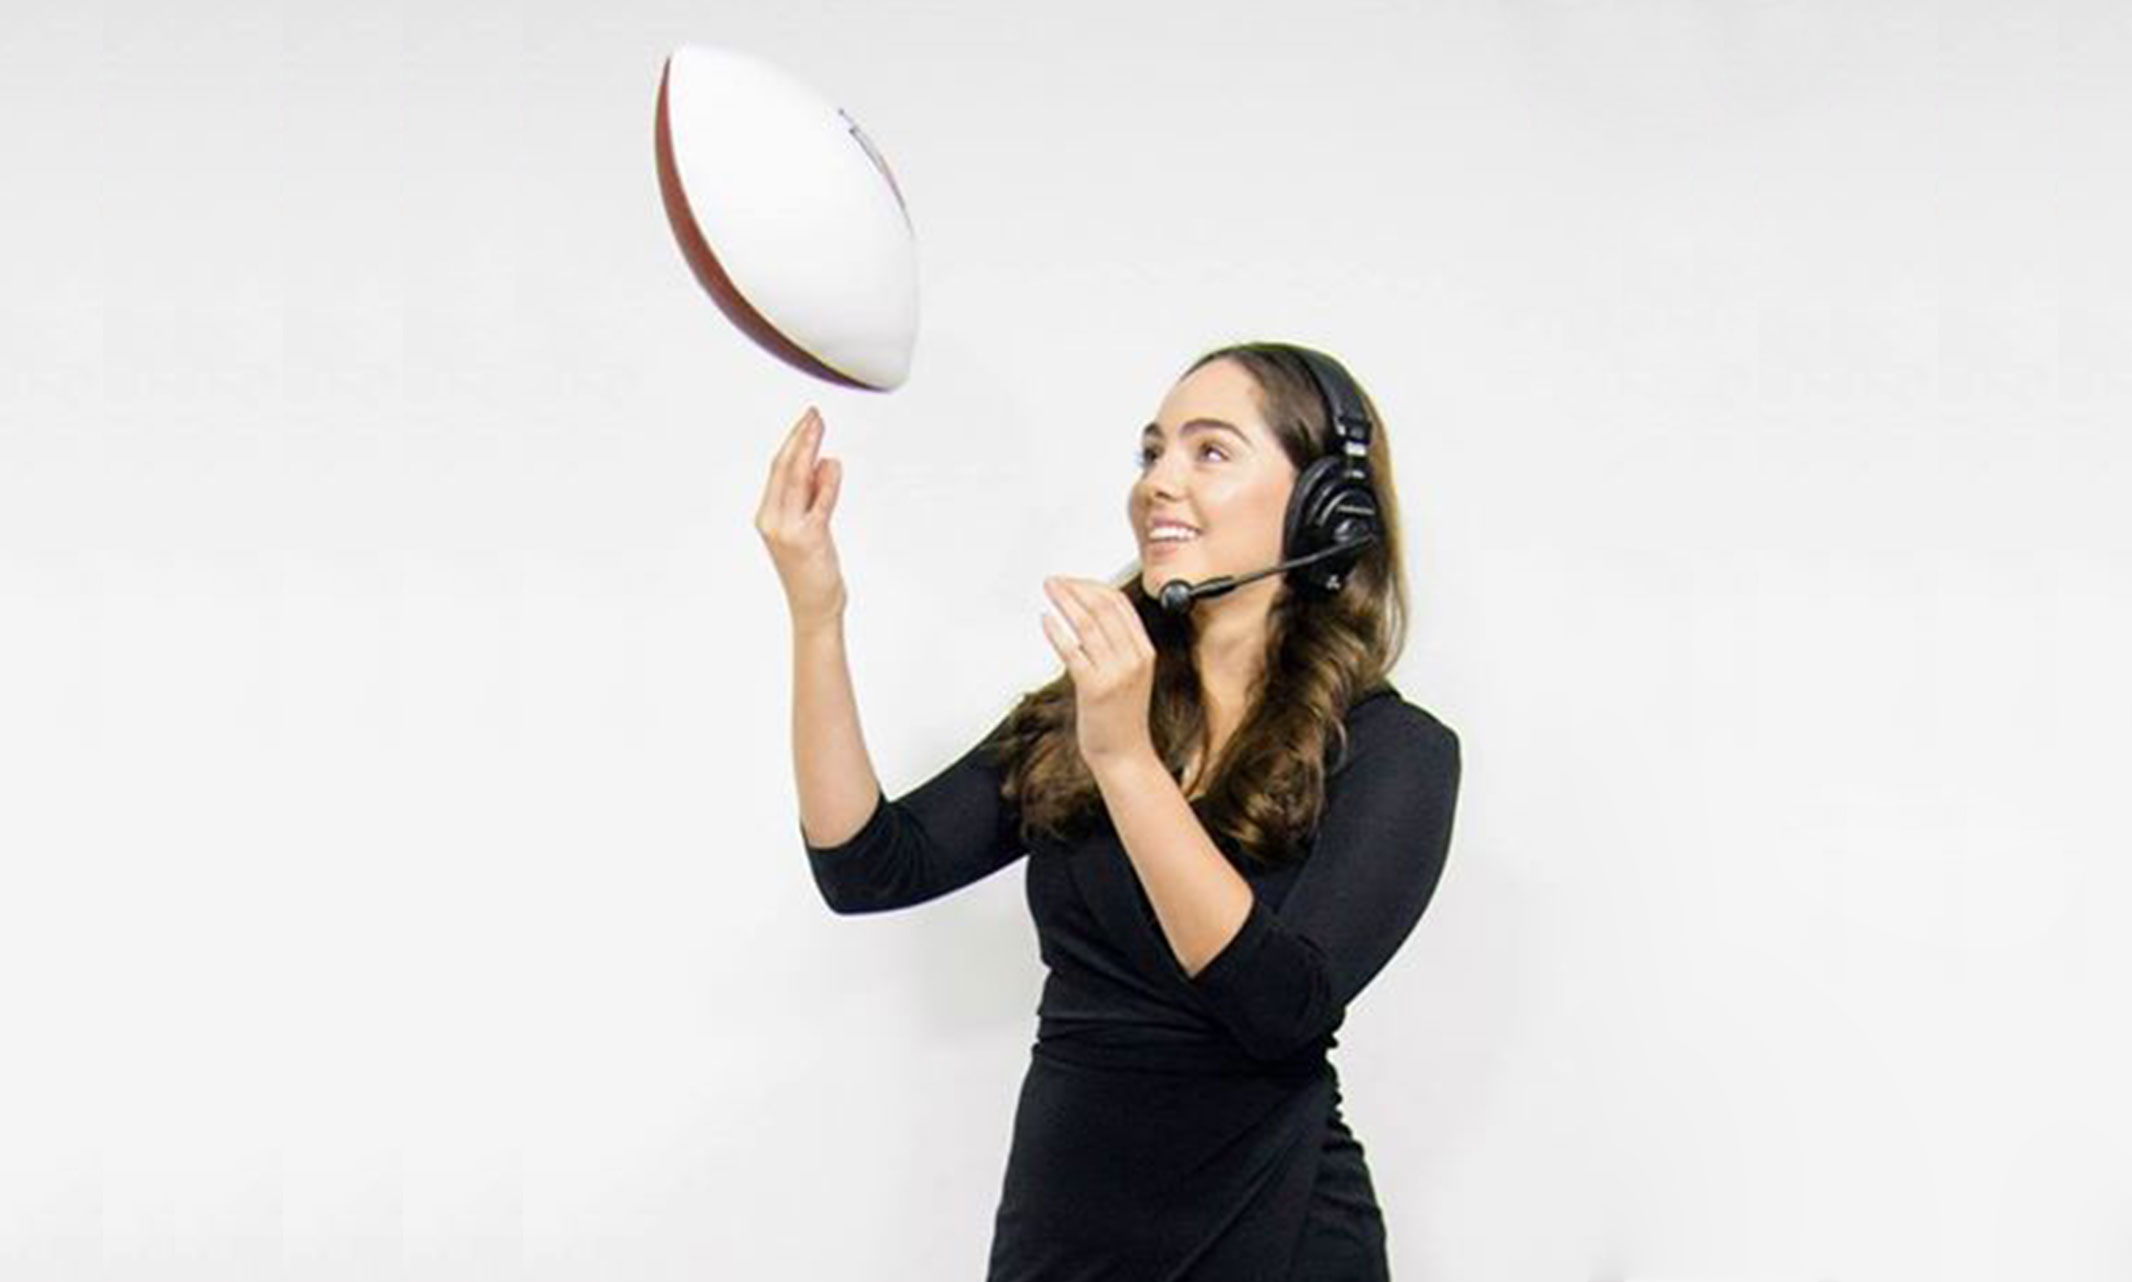 Hannah Bassham tossing a football in promotional photo